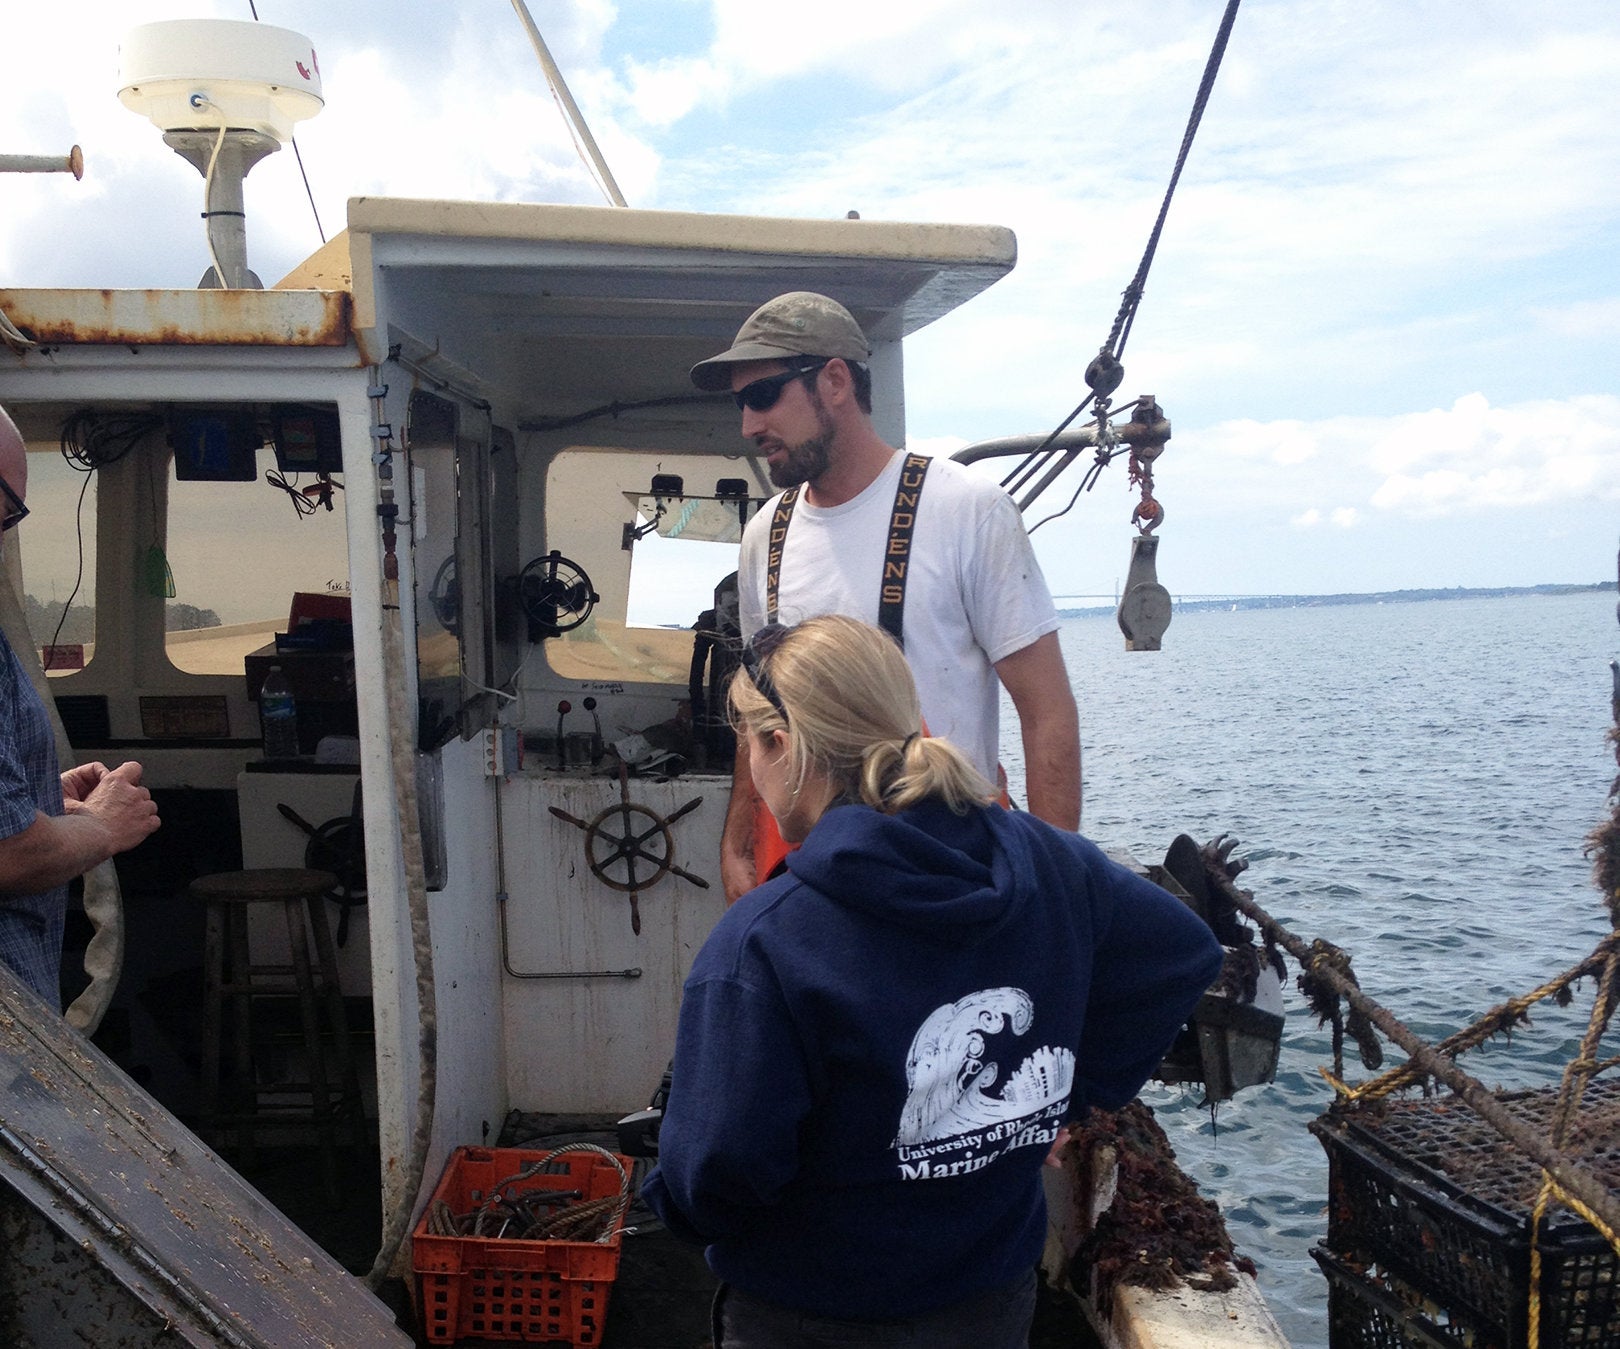 Tracey Dalton, professor and chair of the department of Marine Affairs, lends a hand on board an aquaculture vessel in Narragansett Bay.